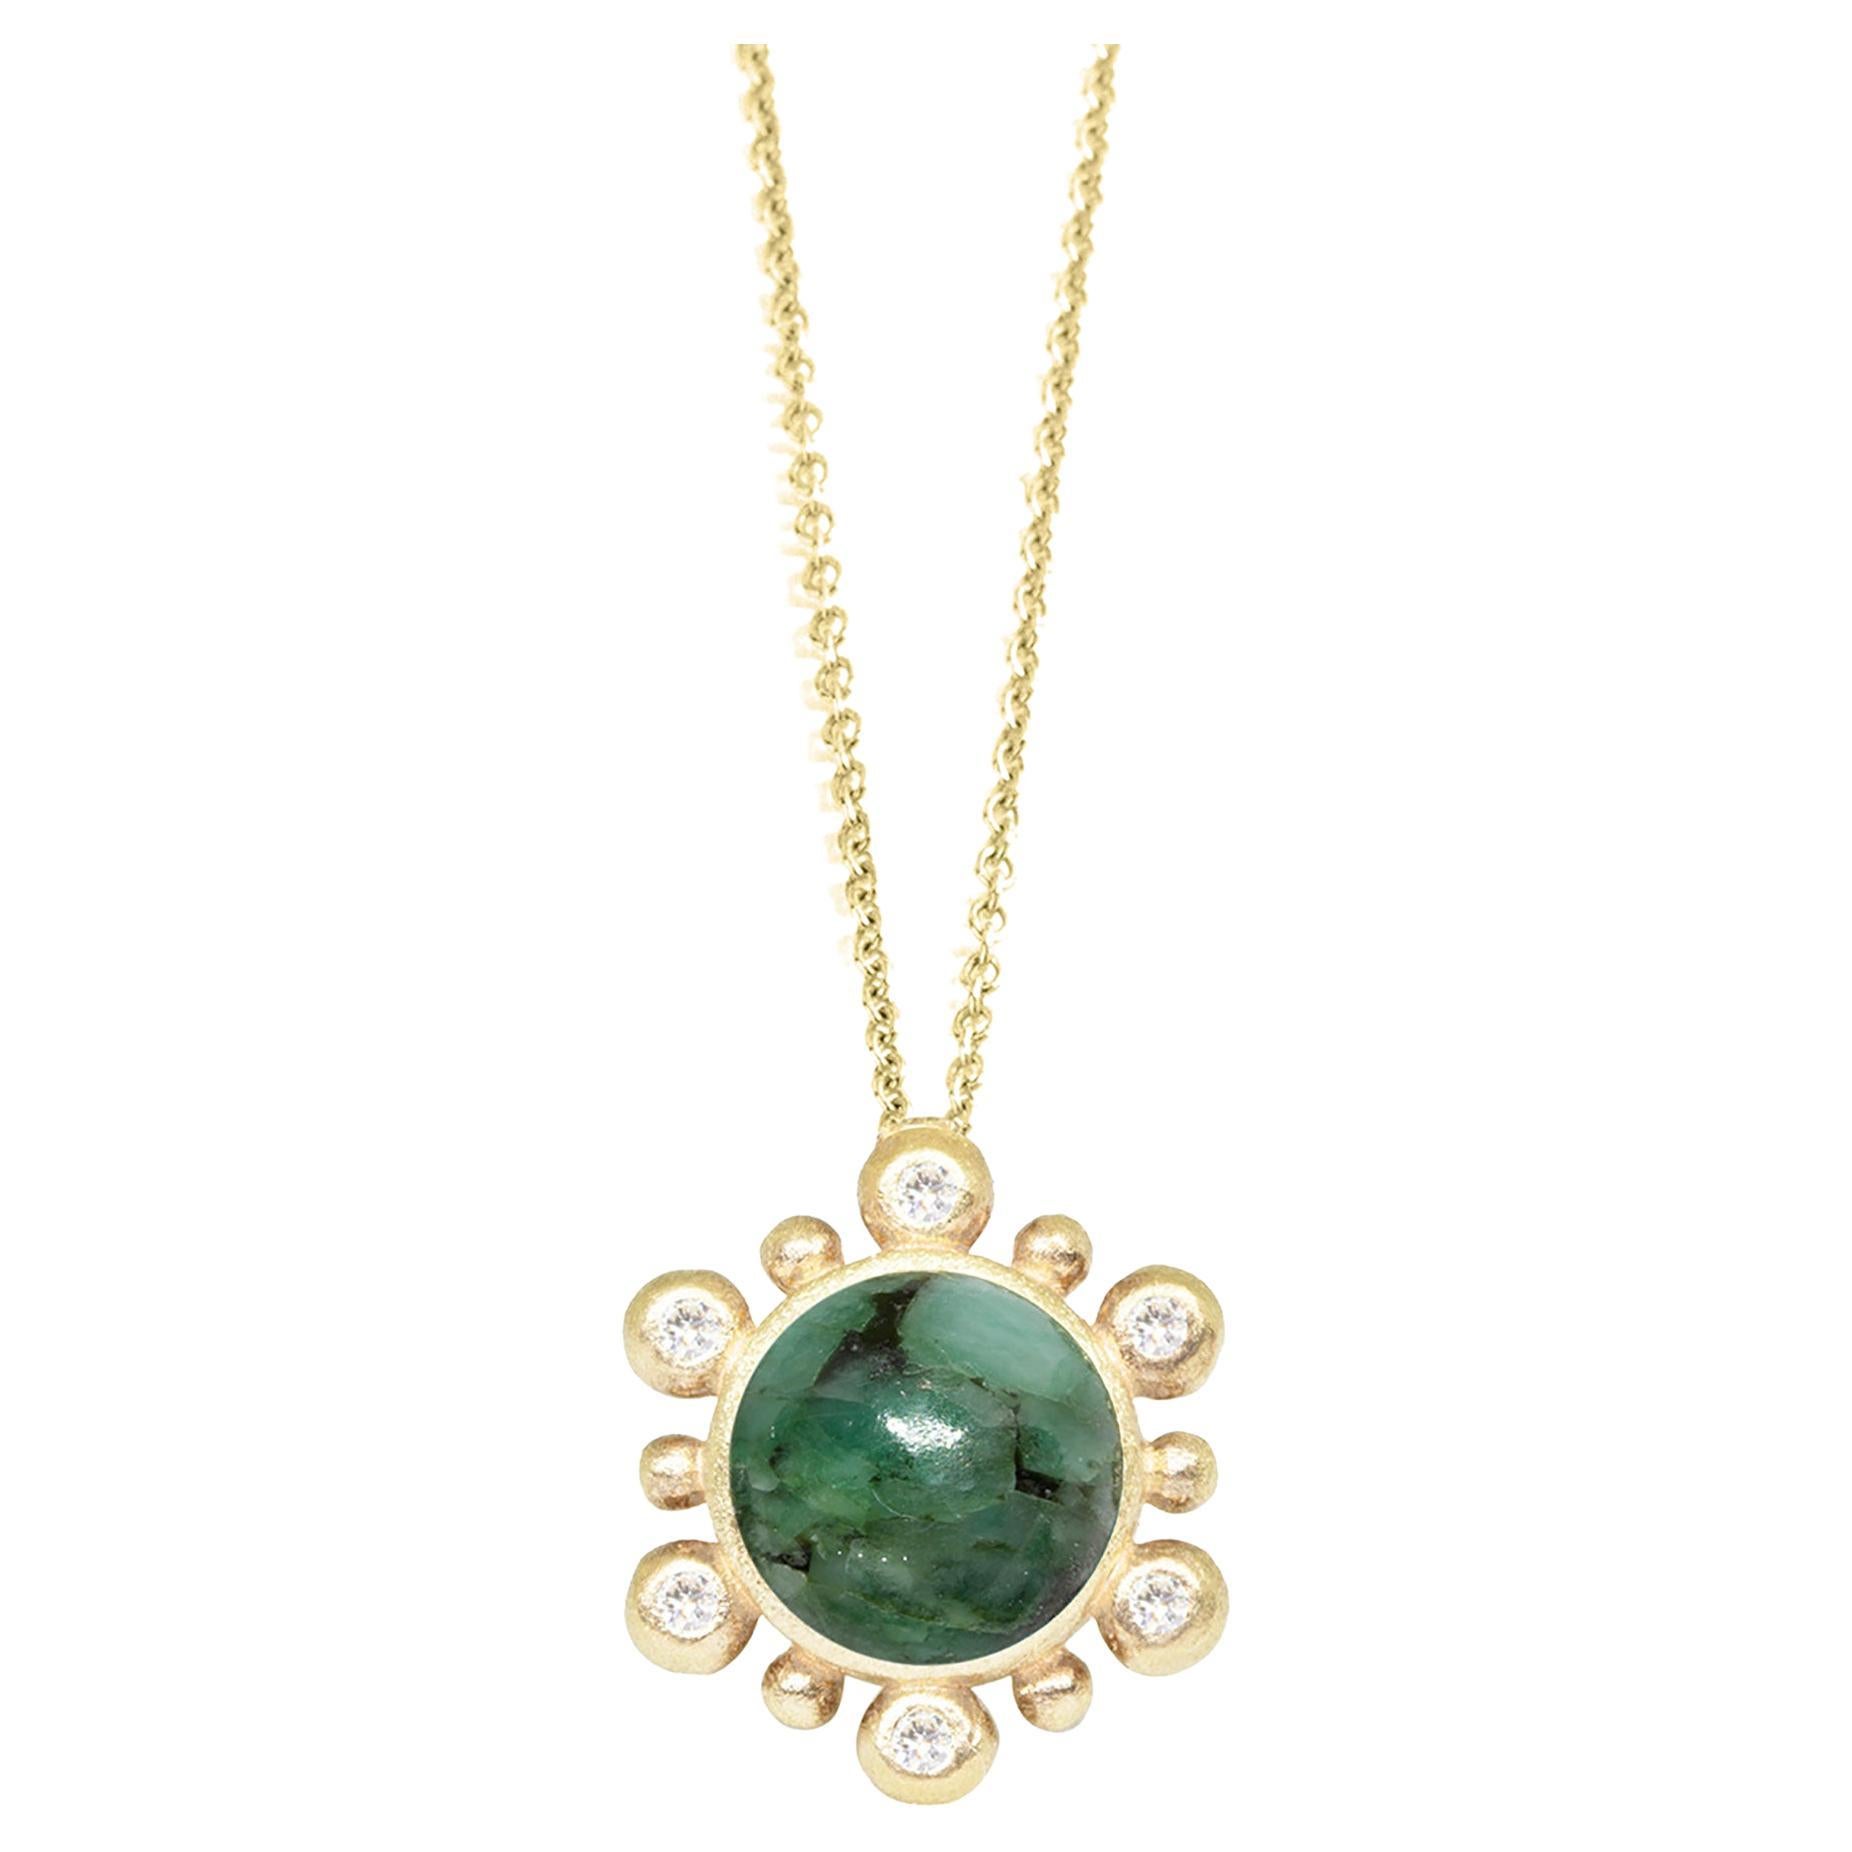 Classy in the artisinal way. Why look like everyone else? Emerald, the stone of kindness, insight and serenity will draw in the heartfelt opportunities that your soul needs. Wear this with your favorite, simple chain and feel the way you